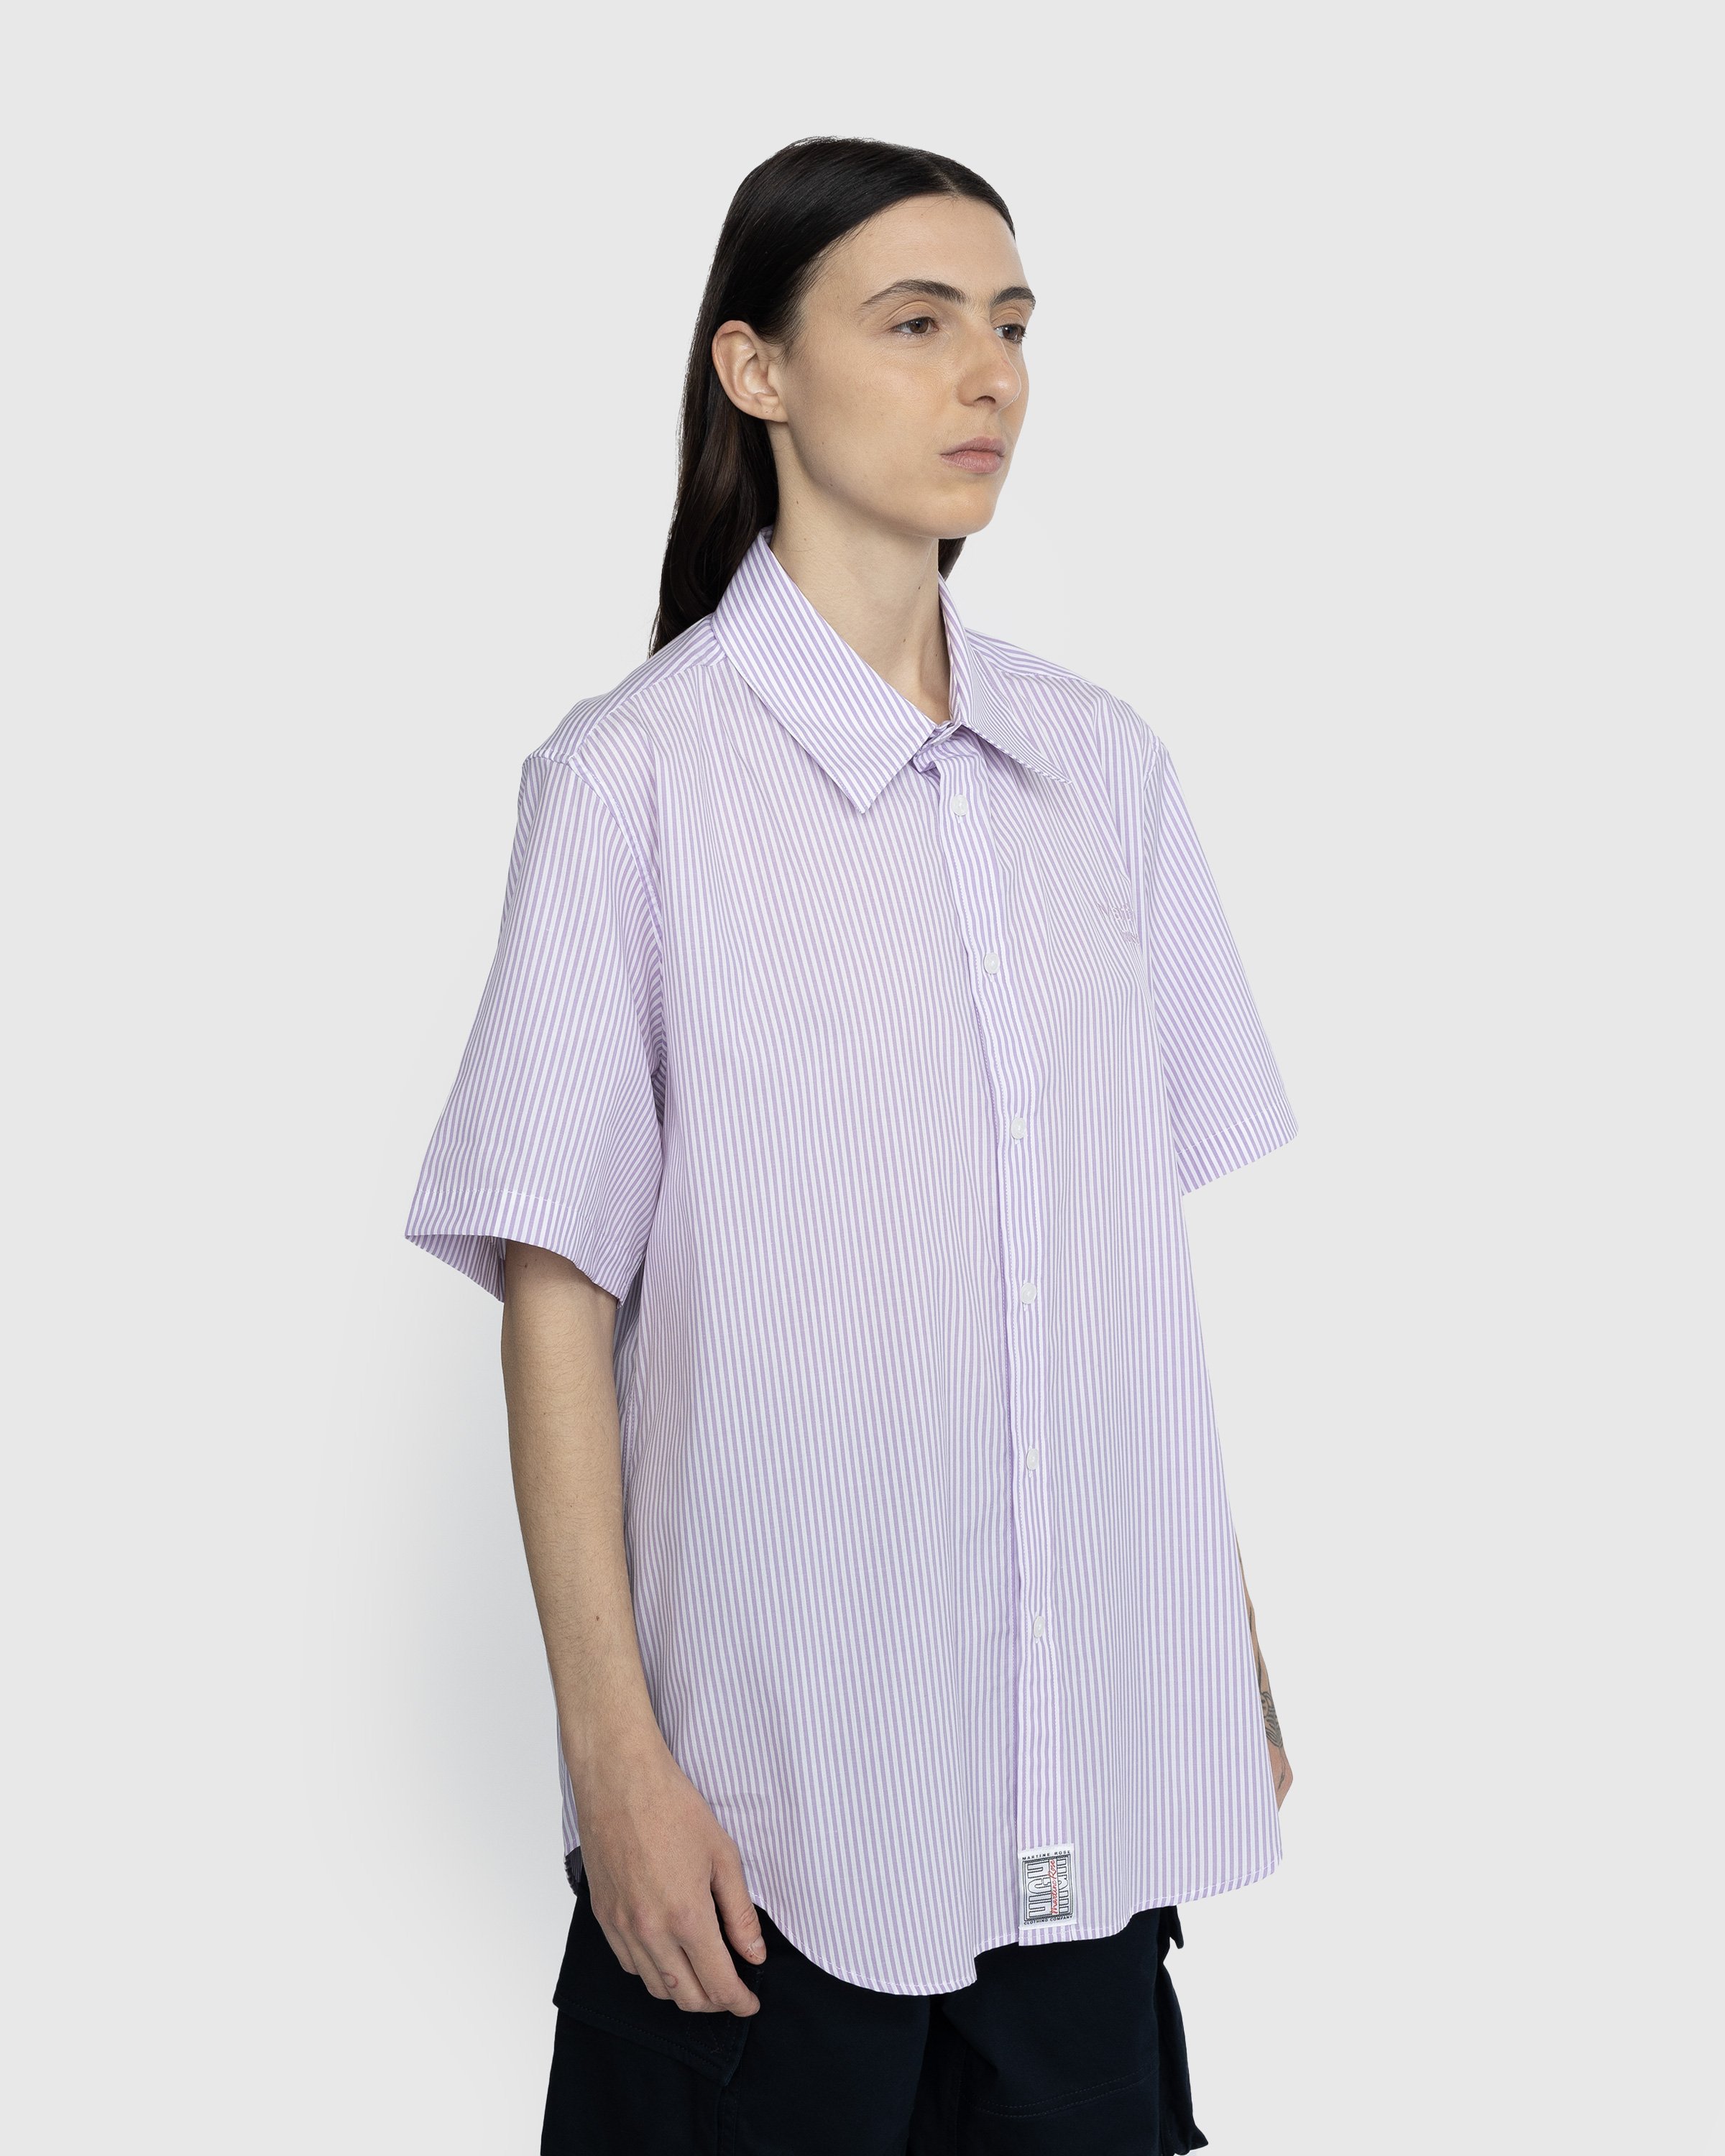 Martine Rose - Classic Short-Sleeve Button-Down Shirt Lilac and White Stripe - Clothing - Purple - Image 4